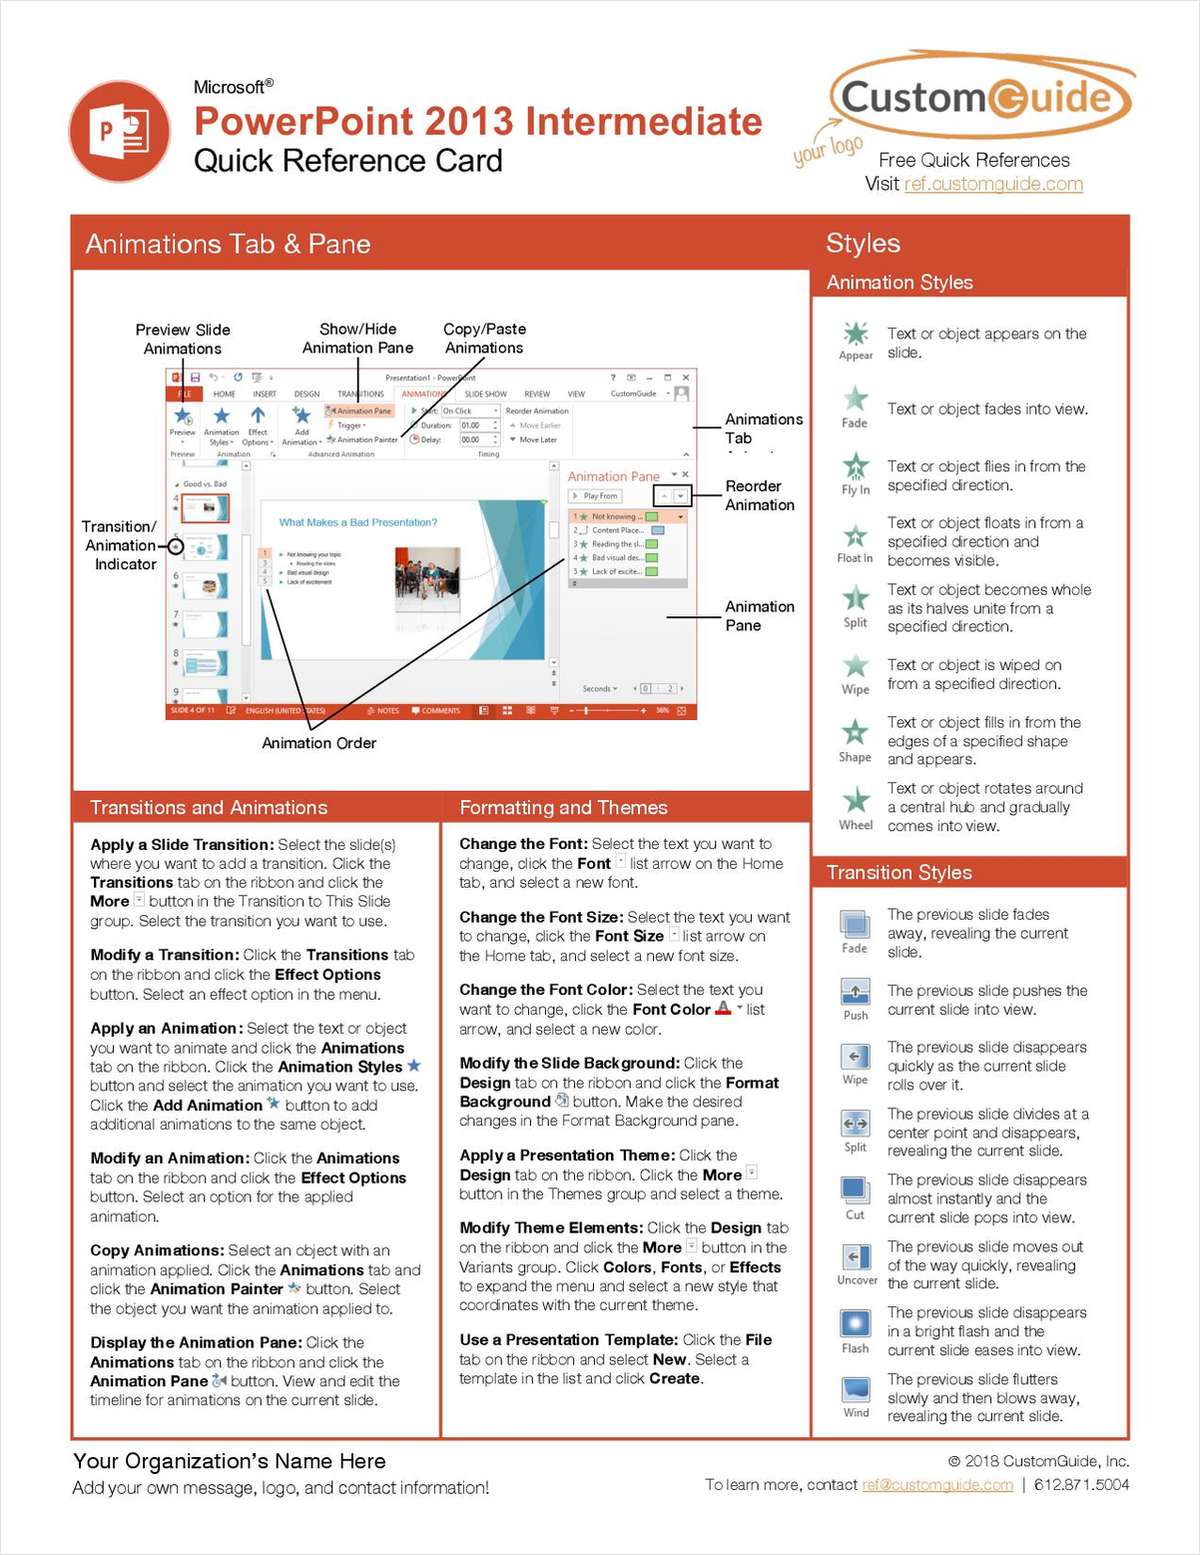 Microsoft PowerPoint 2013 Intermediate - Quick Reference Card